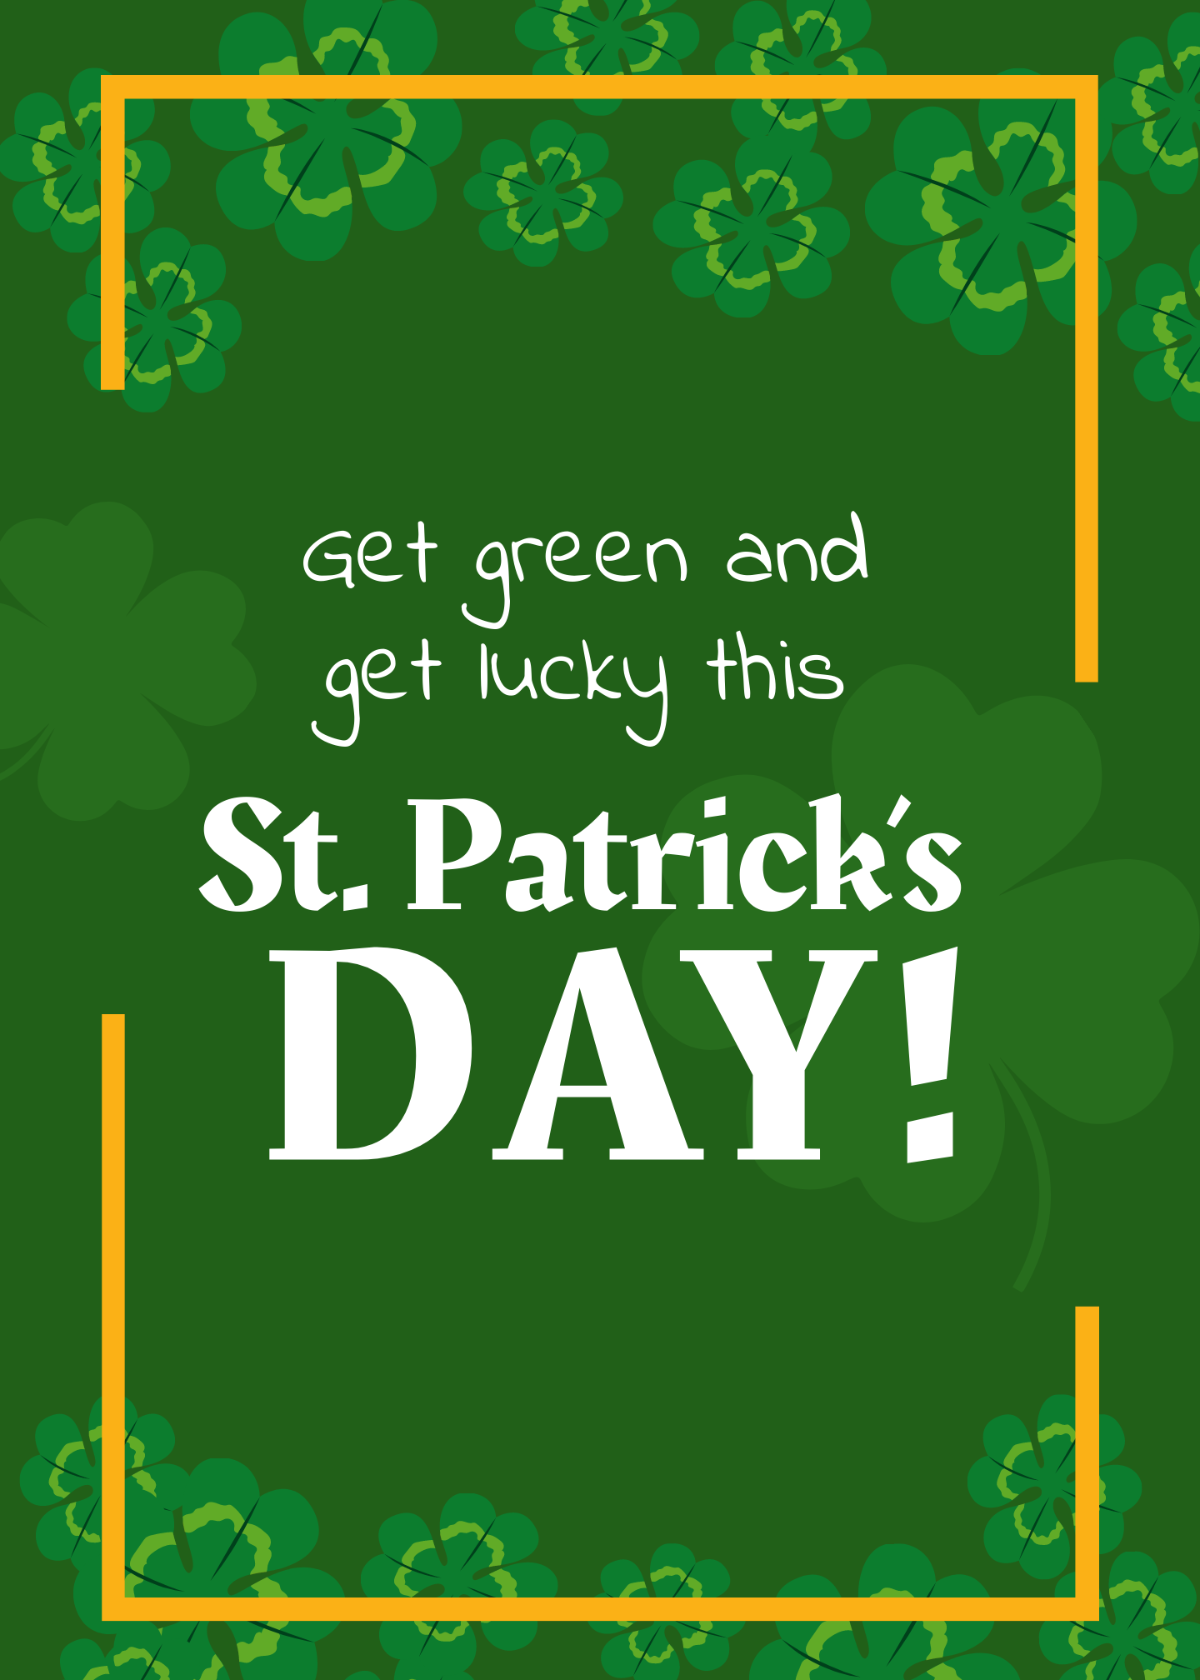 St. Patrick's Day Greeting Card Template